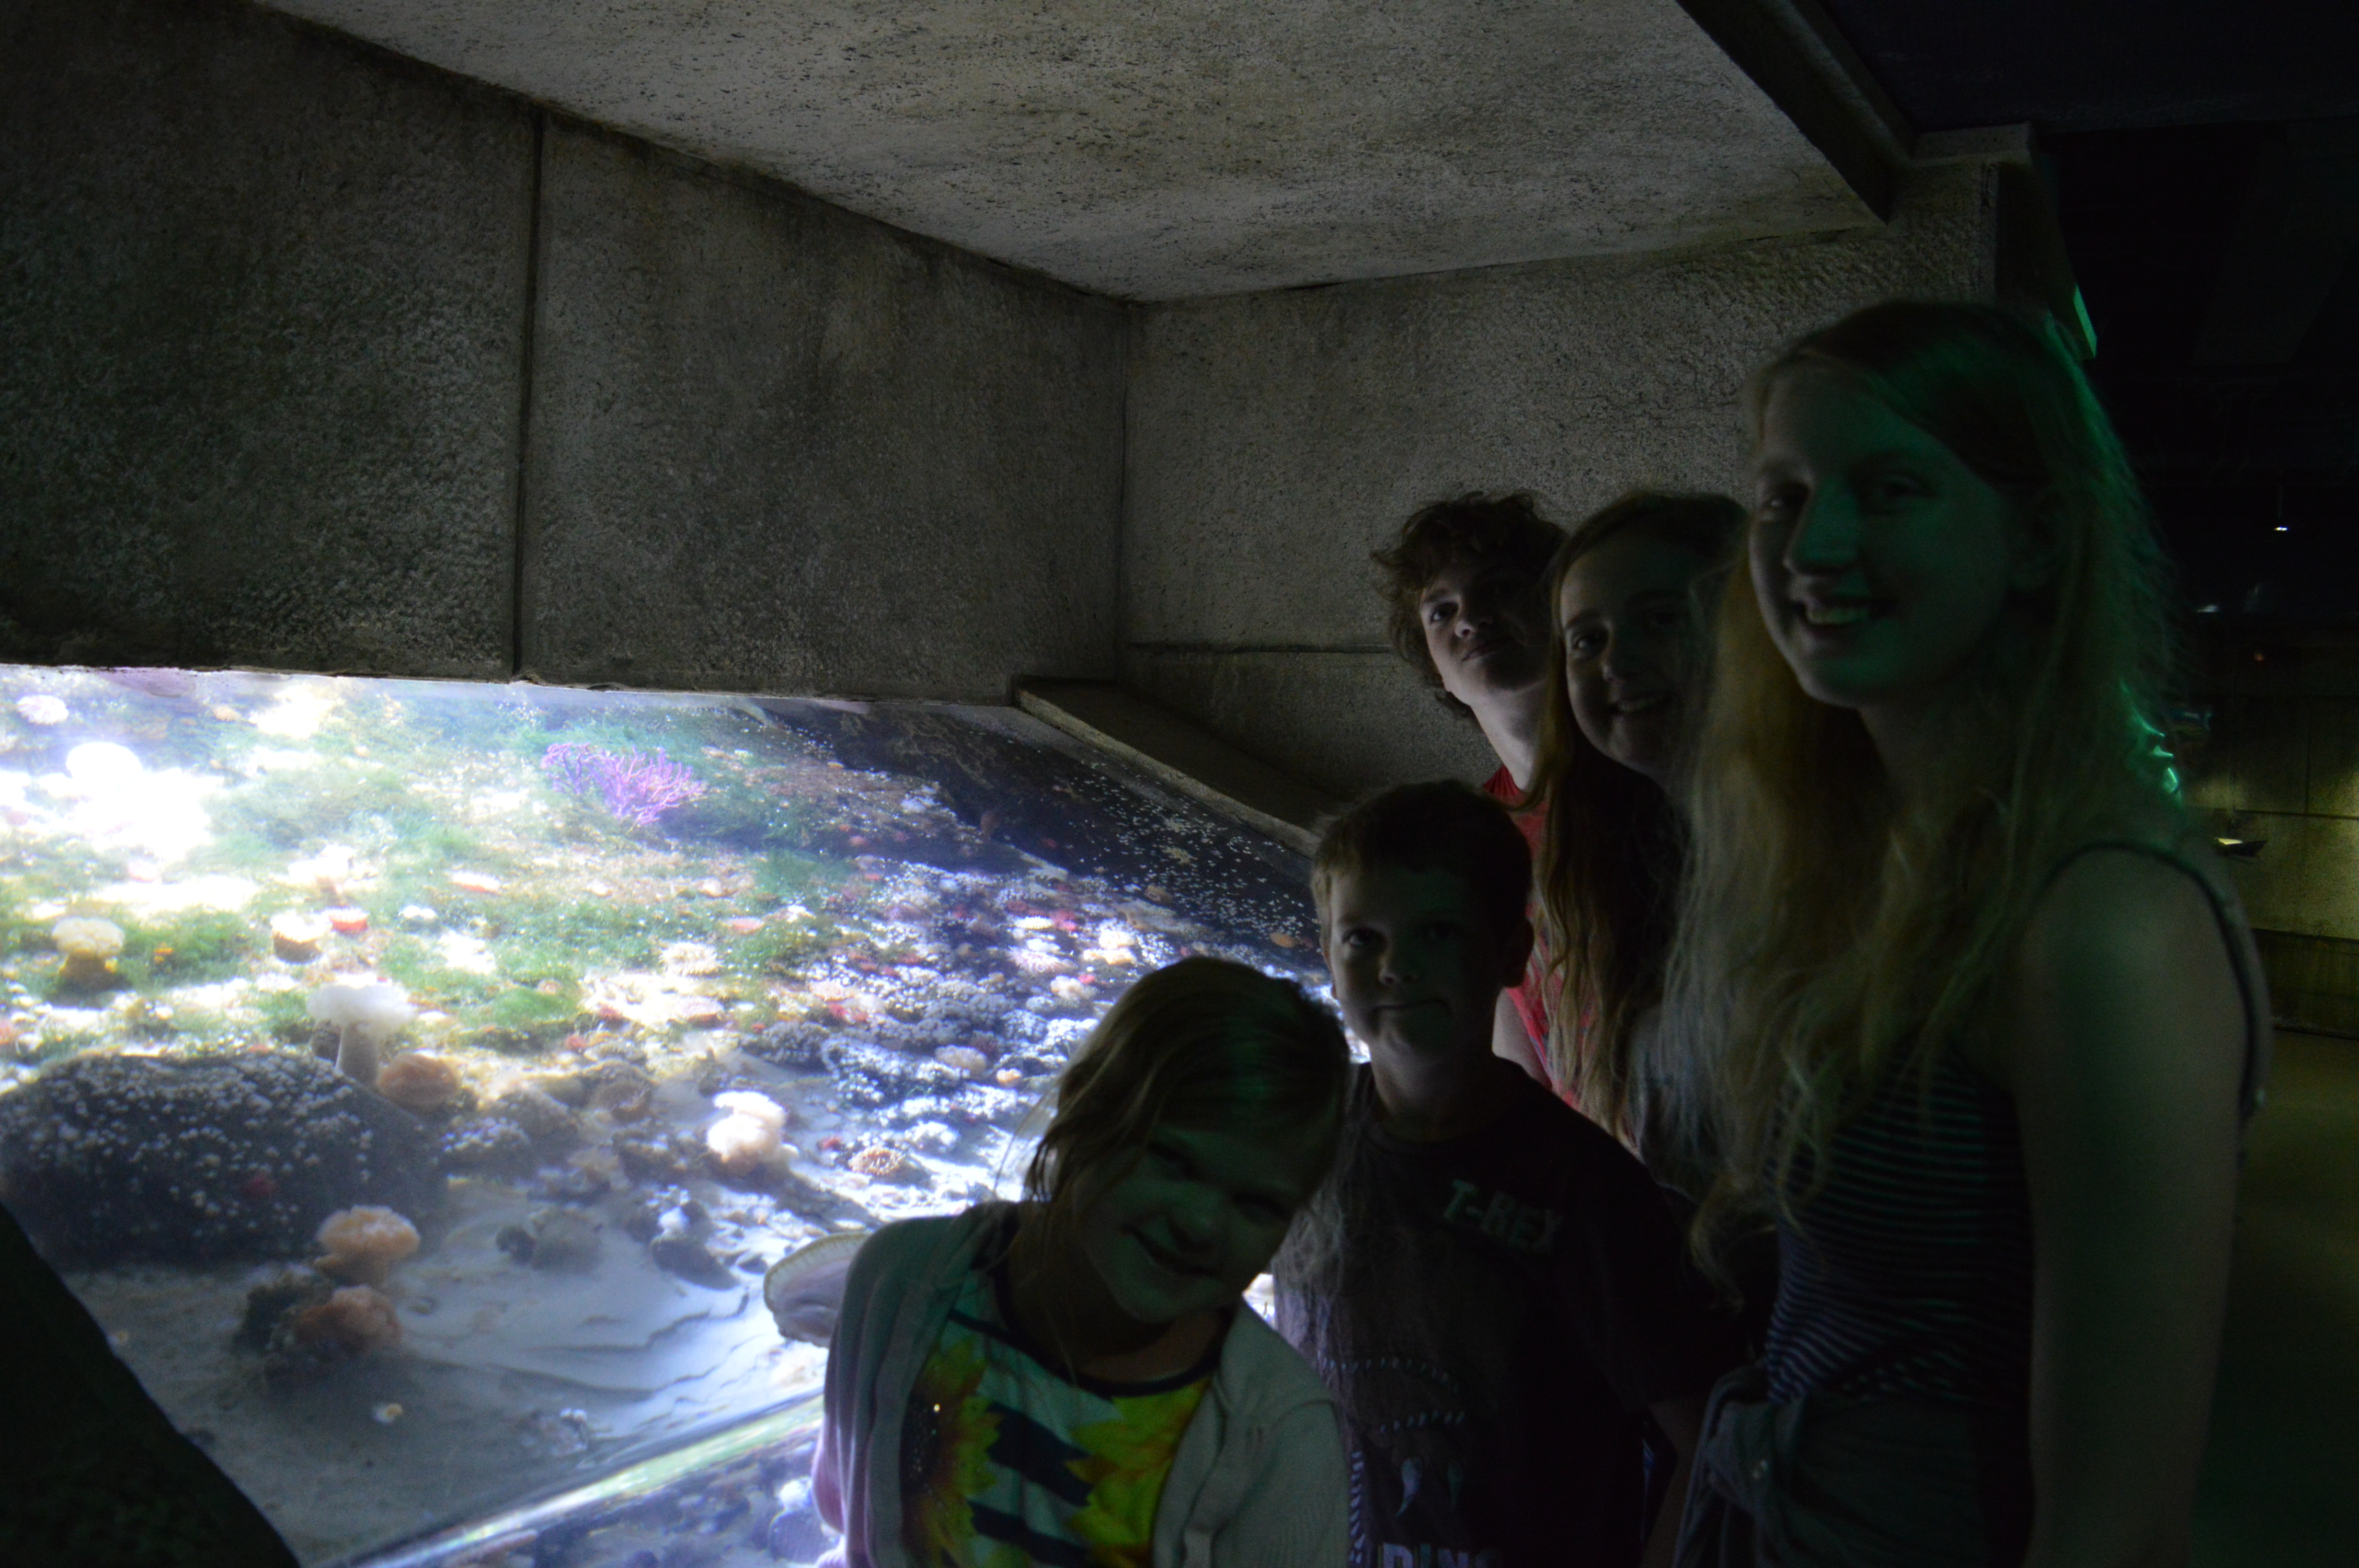 five eldest looking at the fish